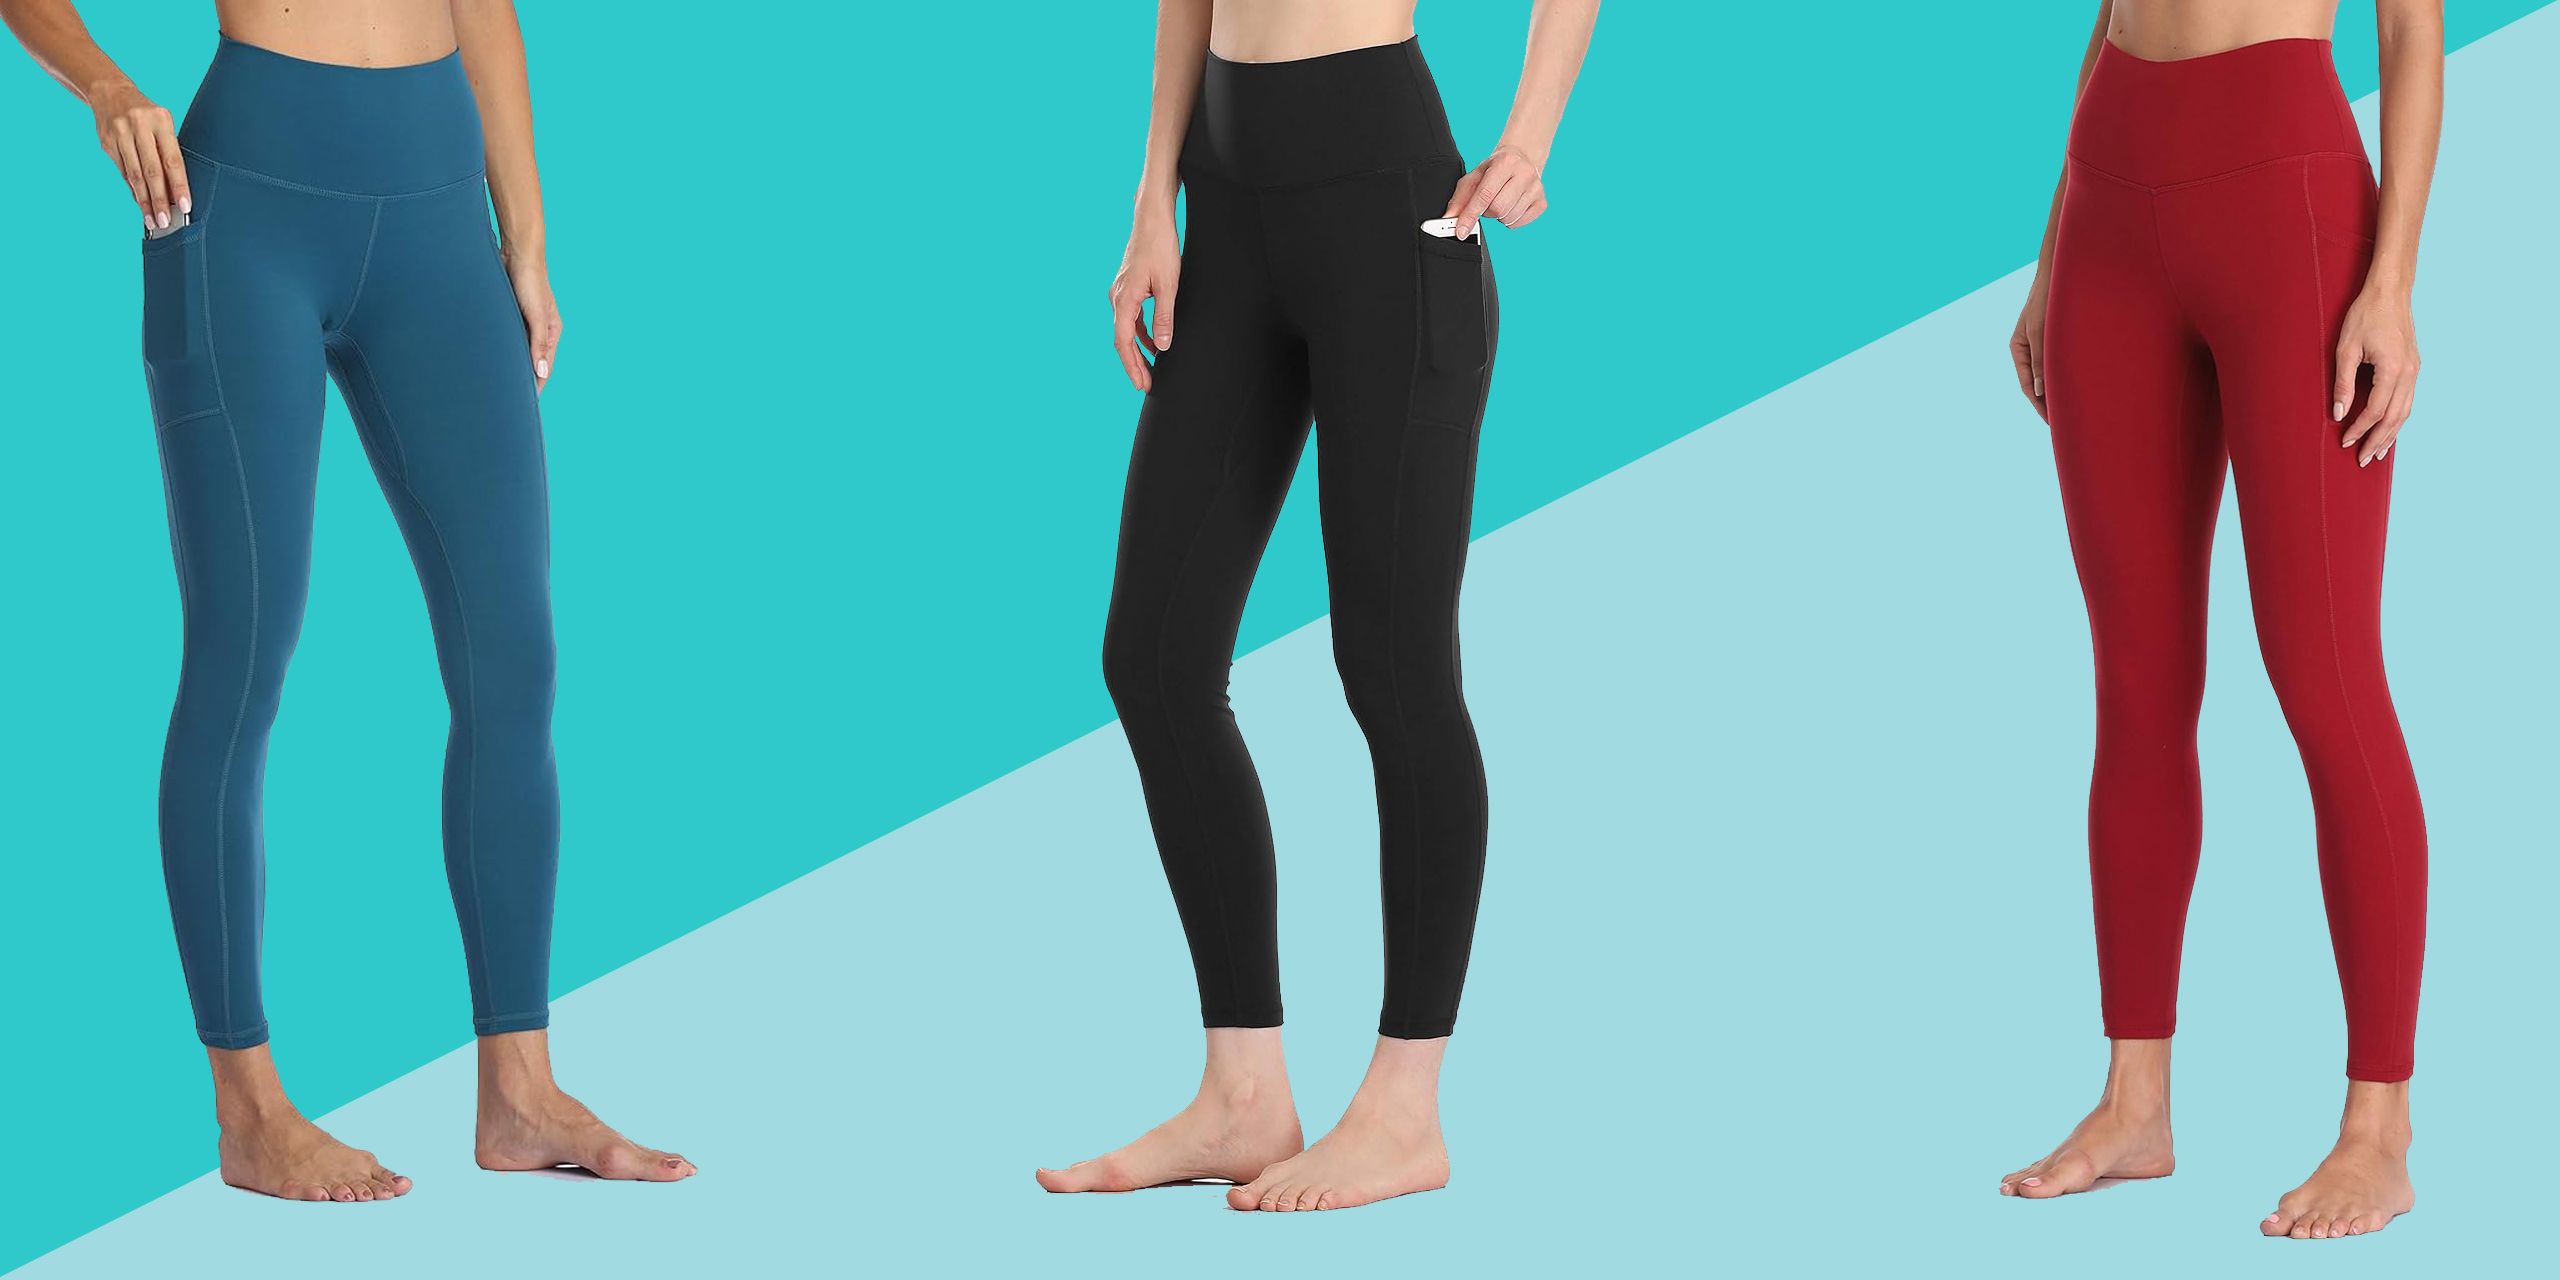 10 Amazon Leggings Deals to Shop During the Prime Early Access Sale